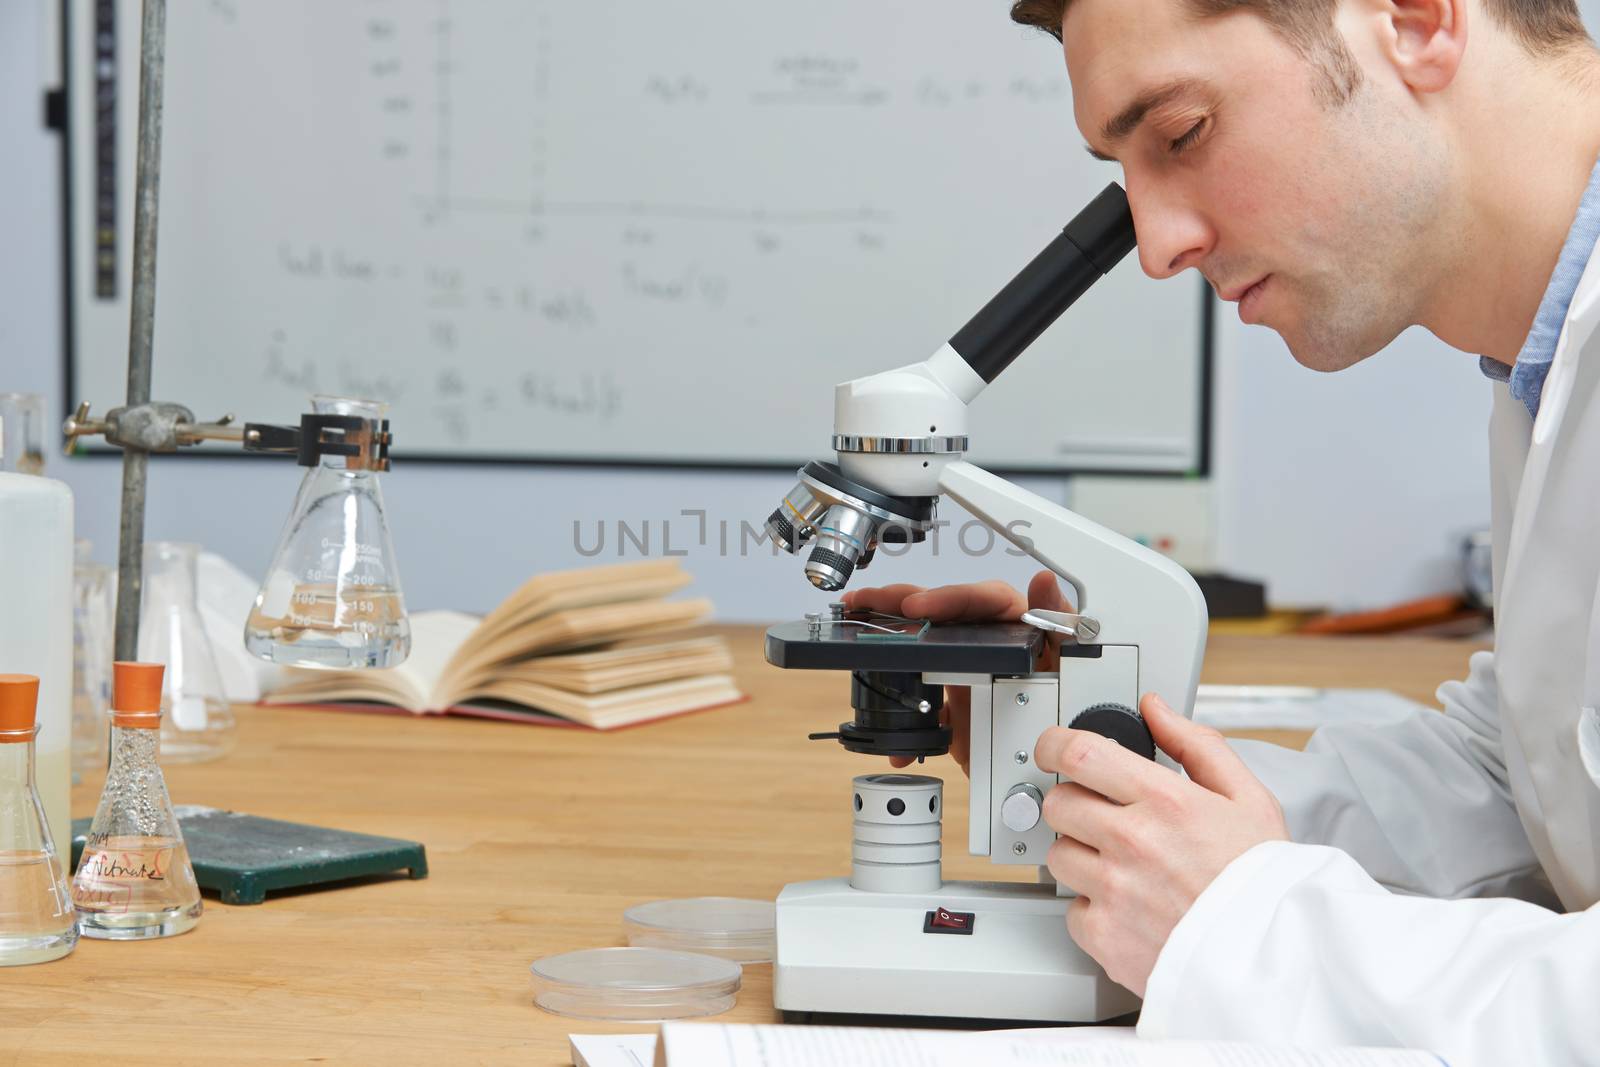 Male Biology Teacher Looking Through Microscope In Classroom by HWS